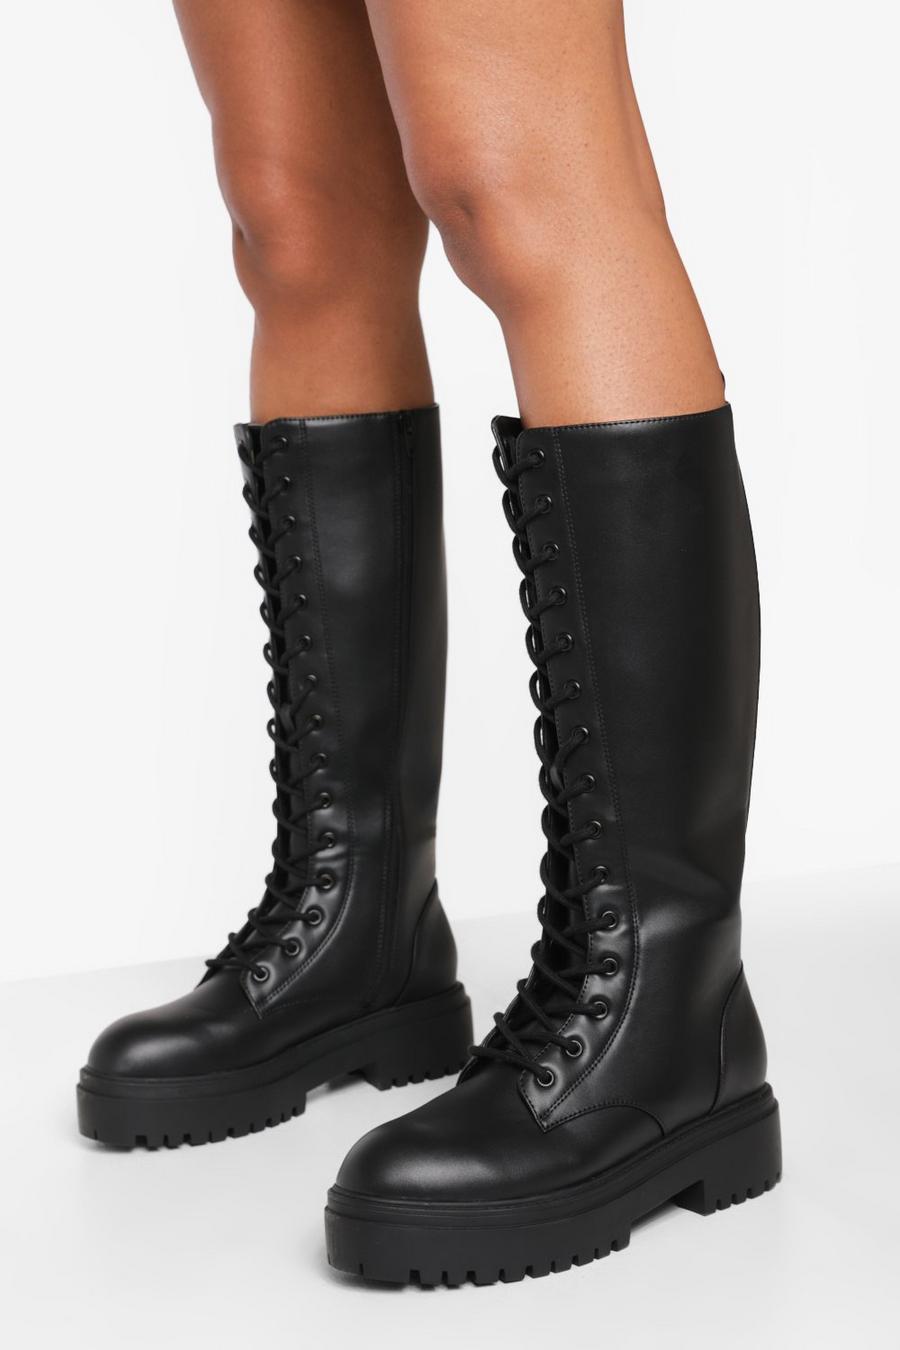 Black Knee High Lace Up Hiker Boots